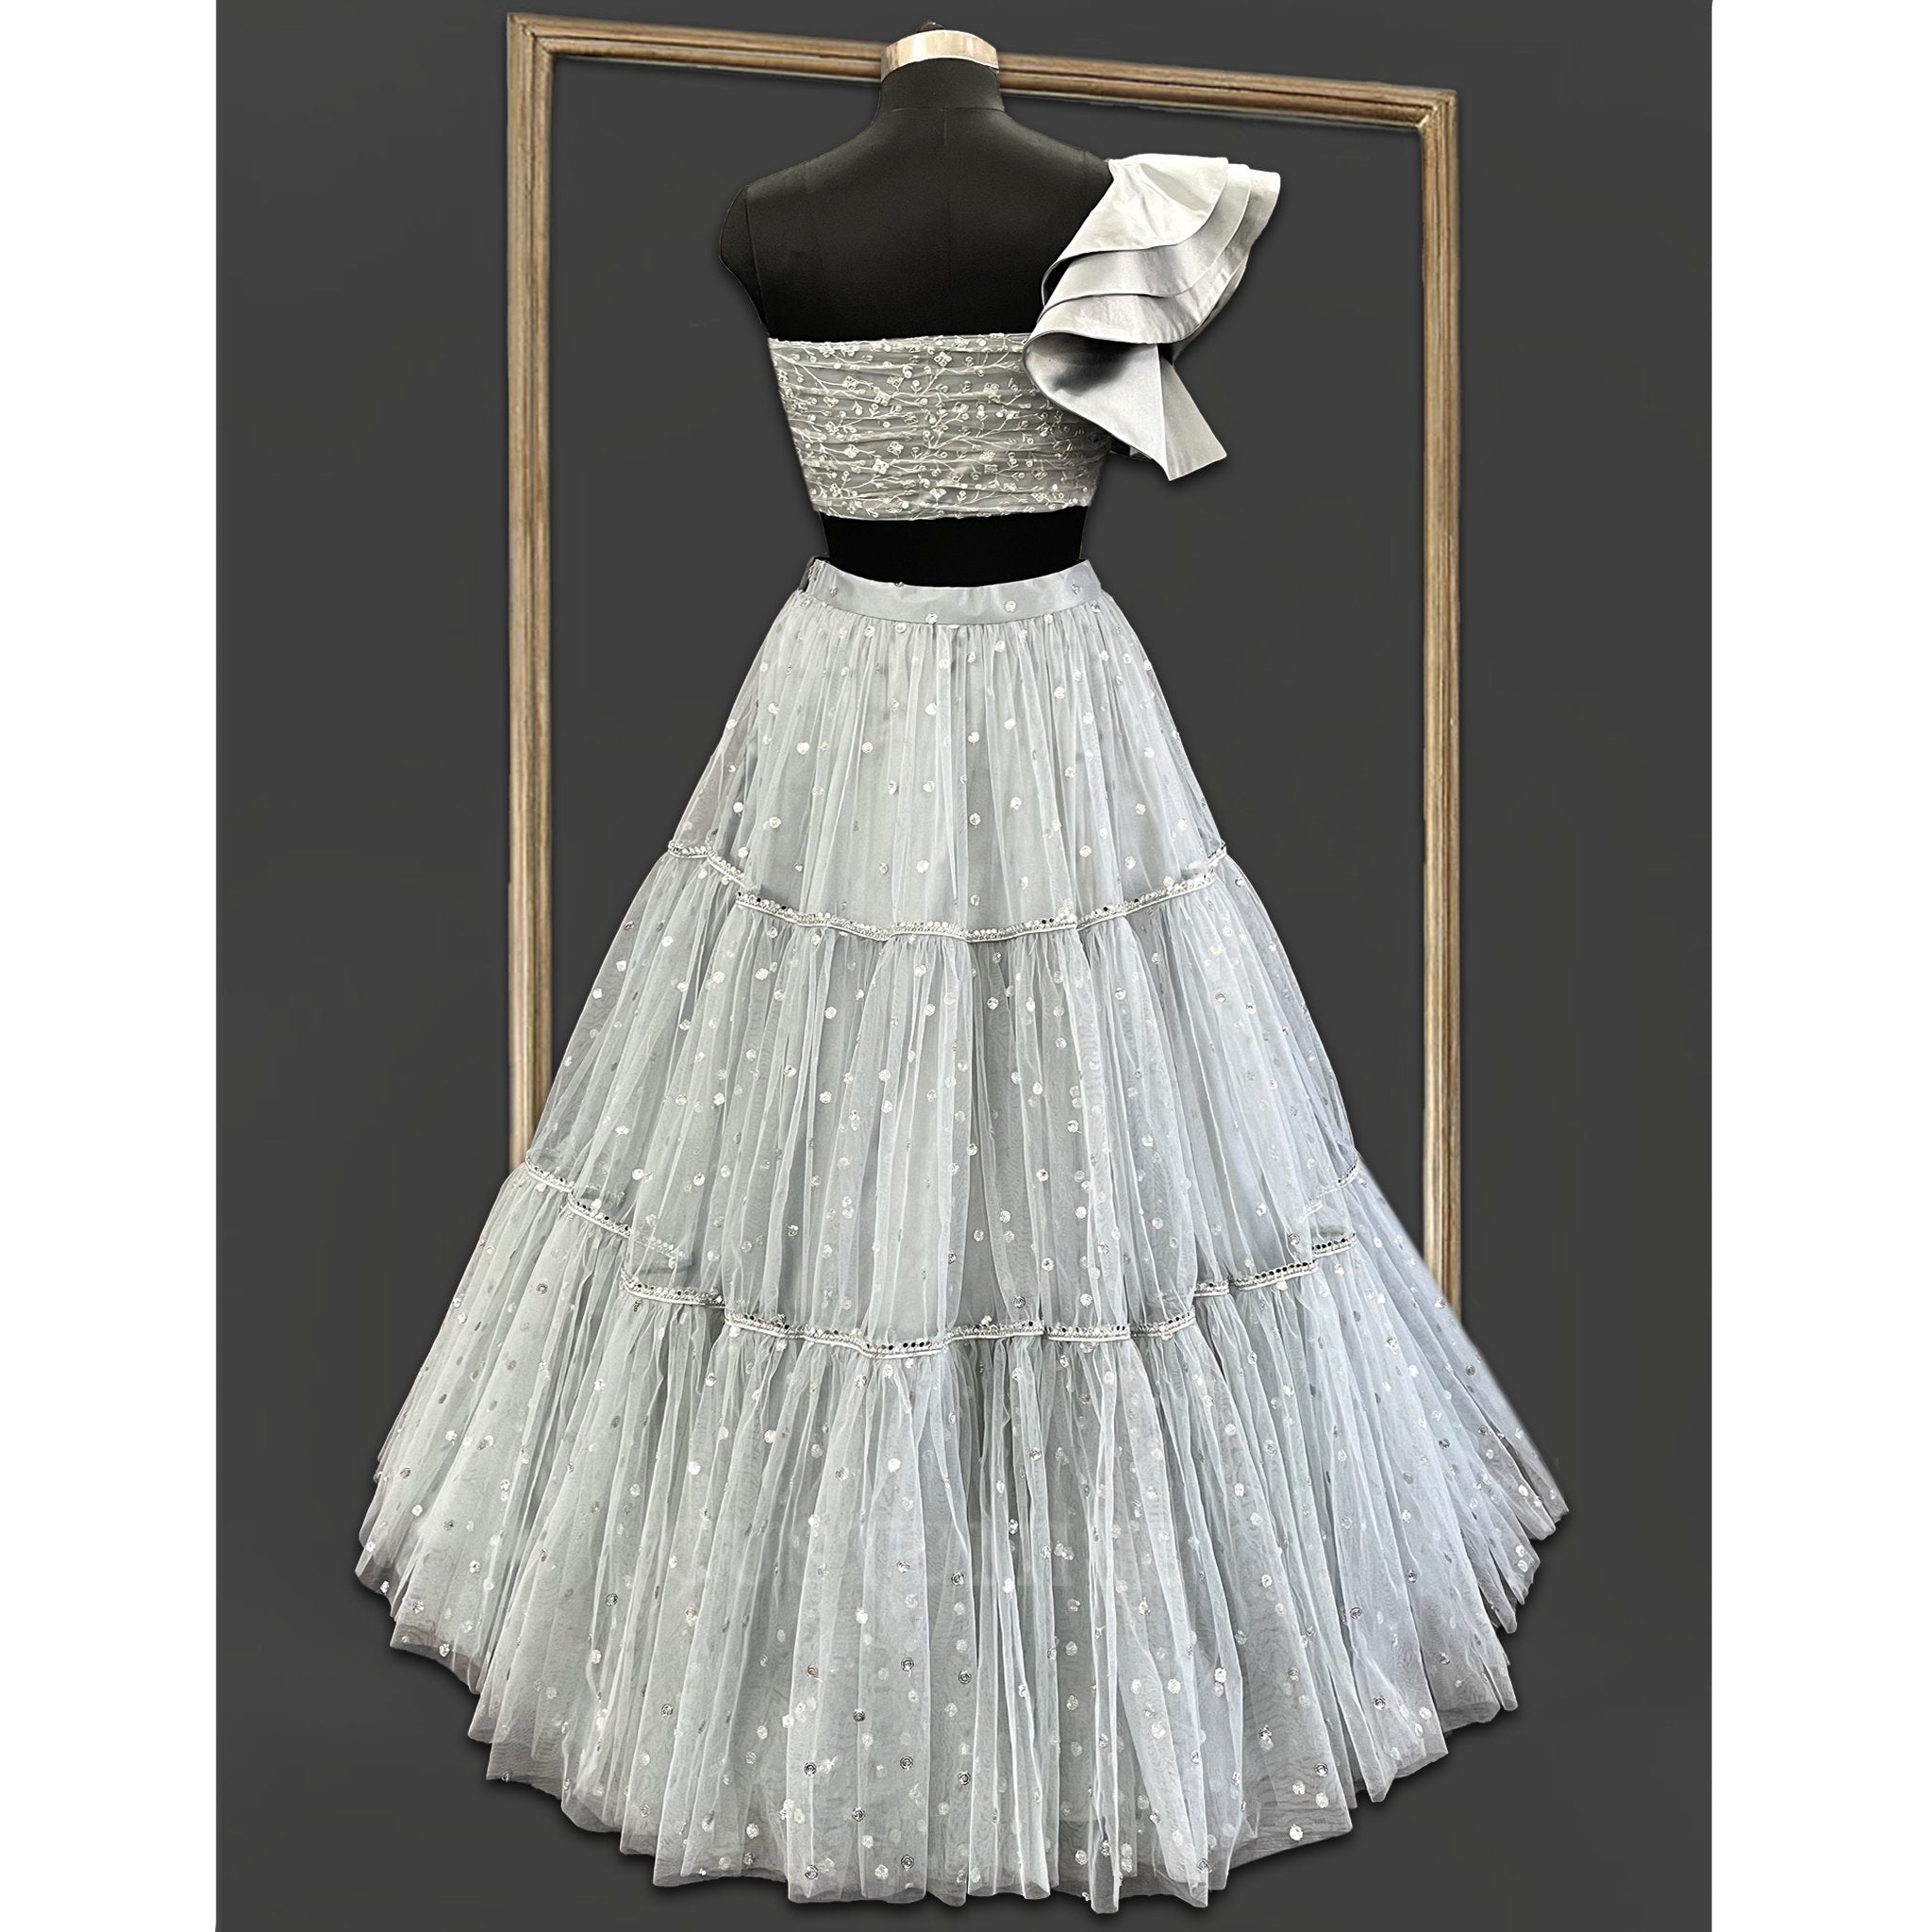 Grey 3 Tiered Skirt with One Shoulder Ruffled Sleeves Top - Indian Designer Bridal Wedding Outfit